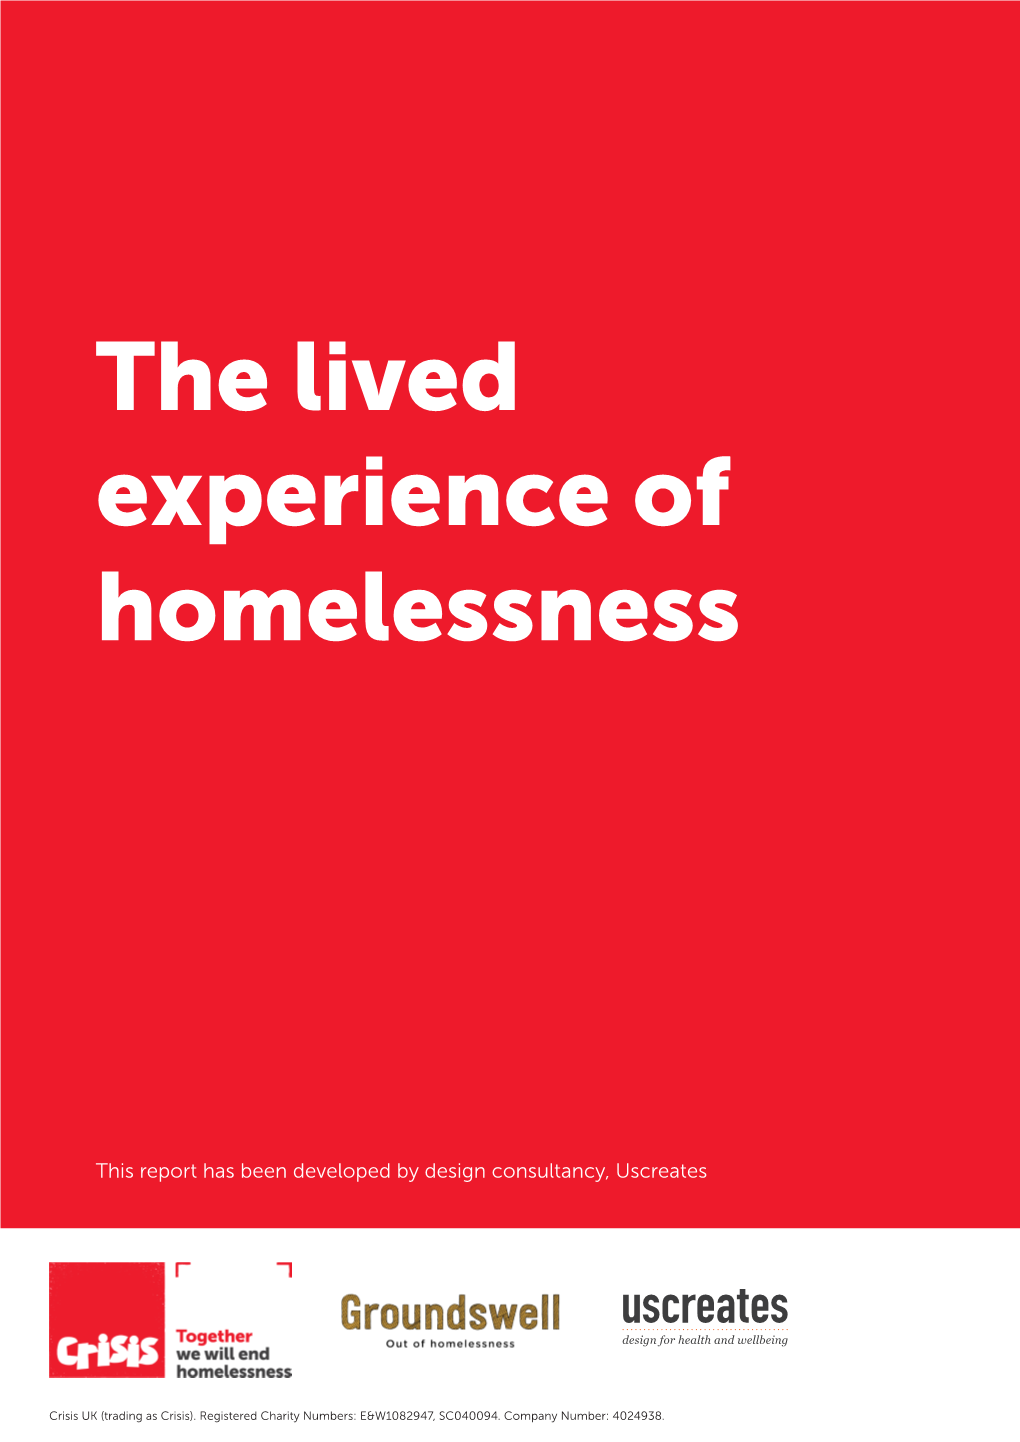 The Lived Experience of Homelessness